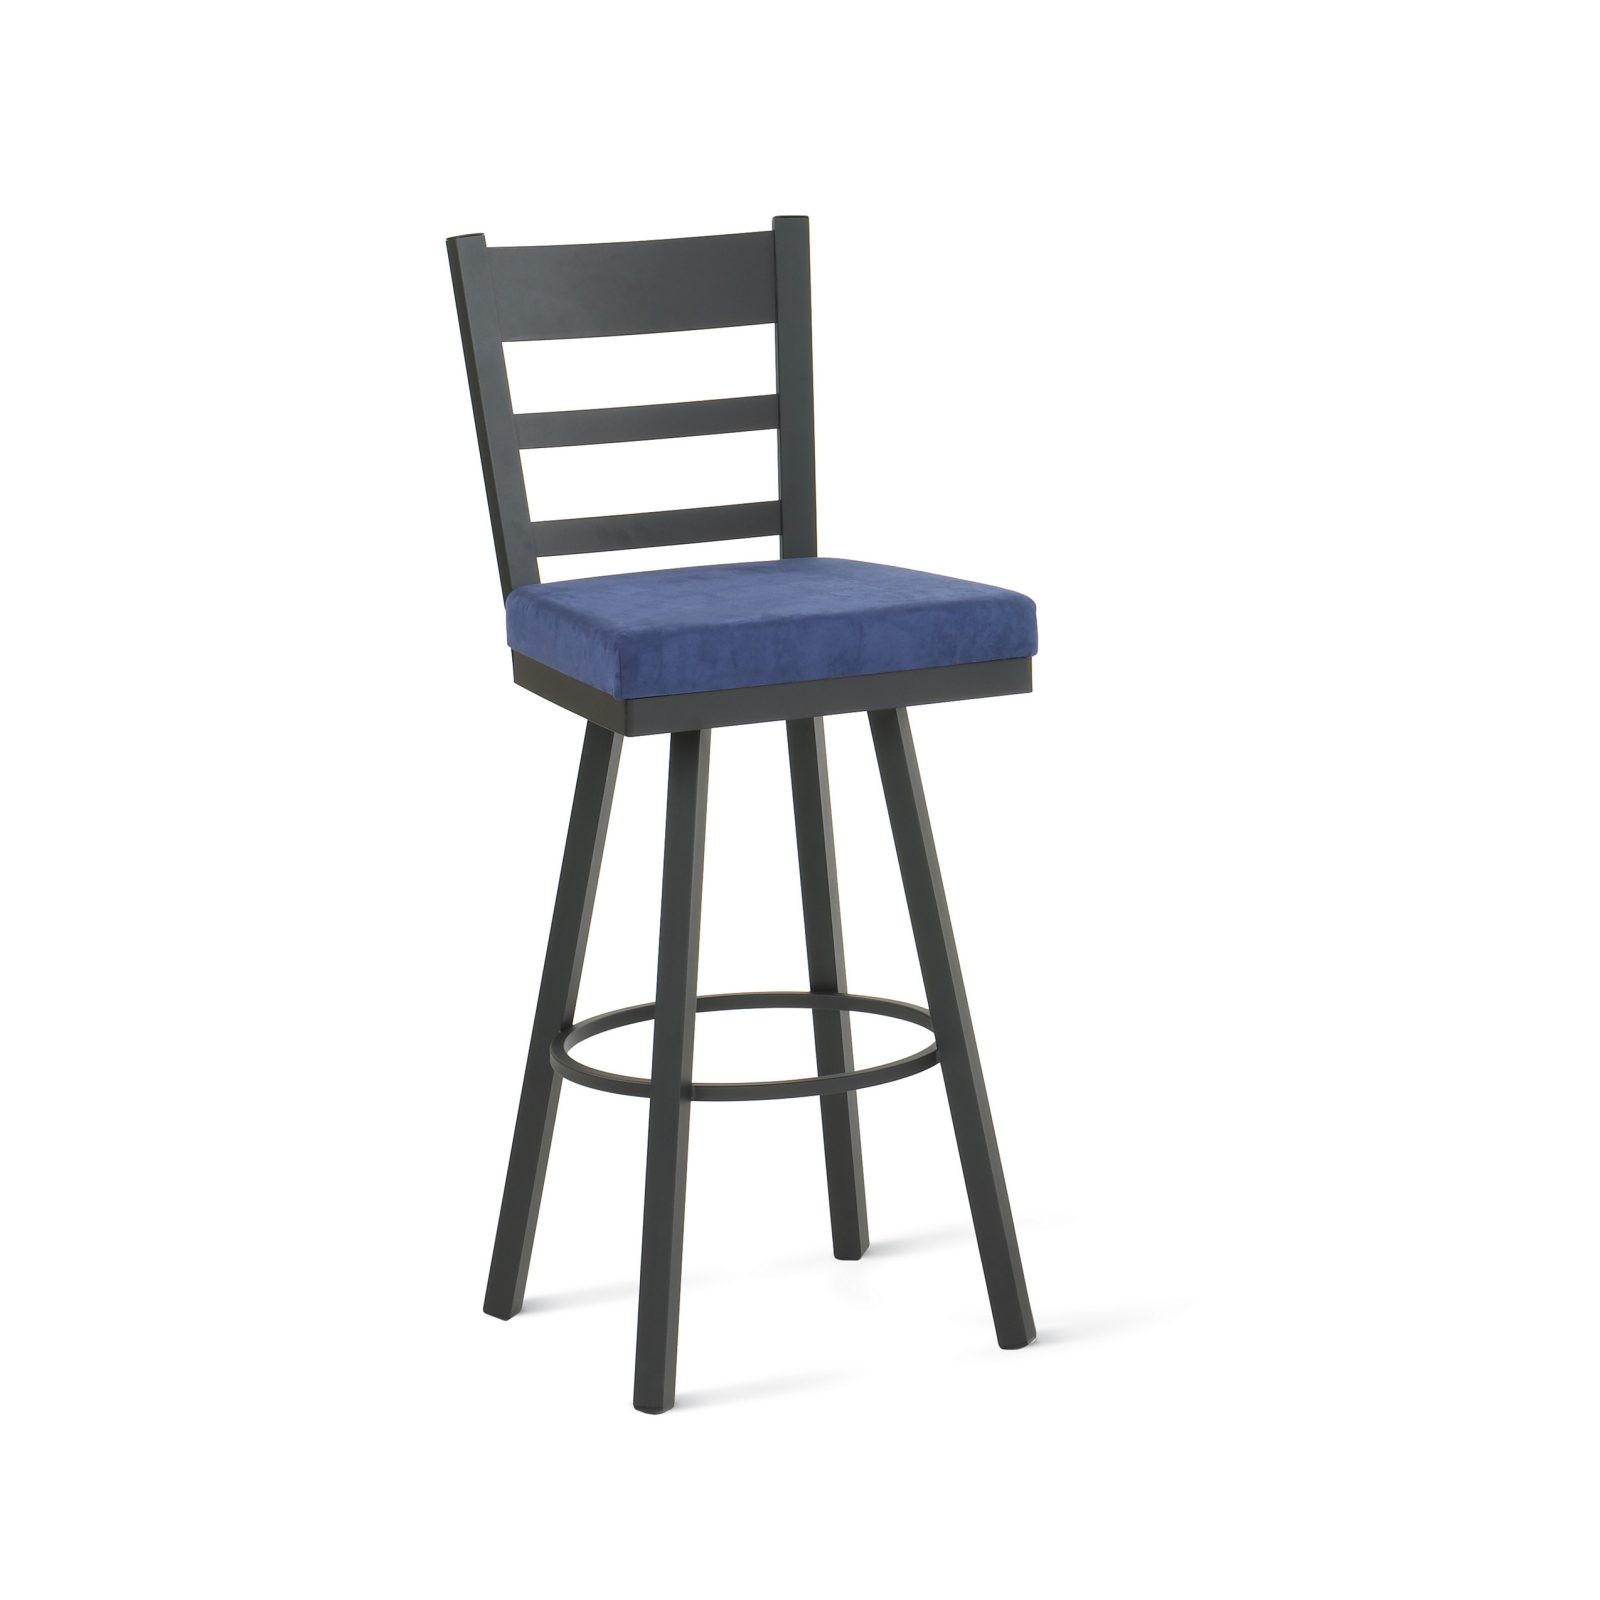 Metal Finish: 25 Black Coral • Seat Covering: Discontinued